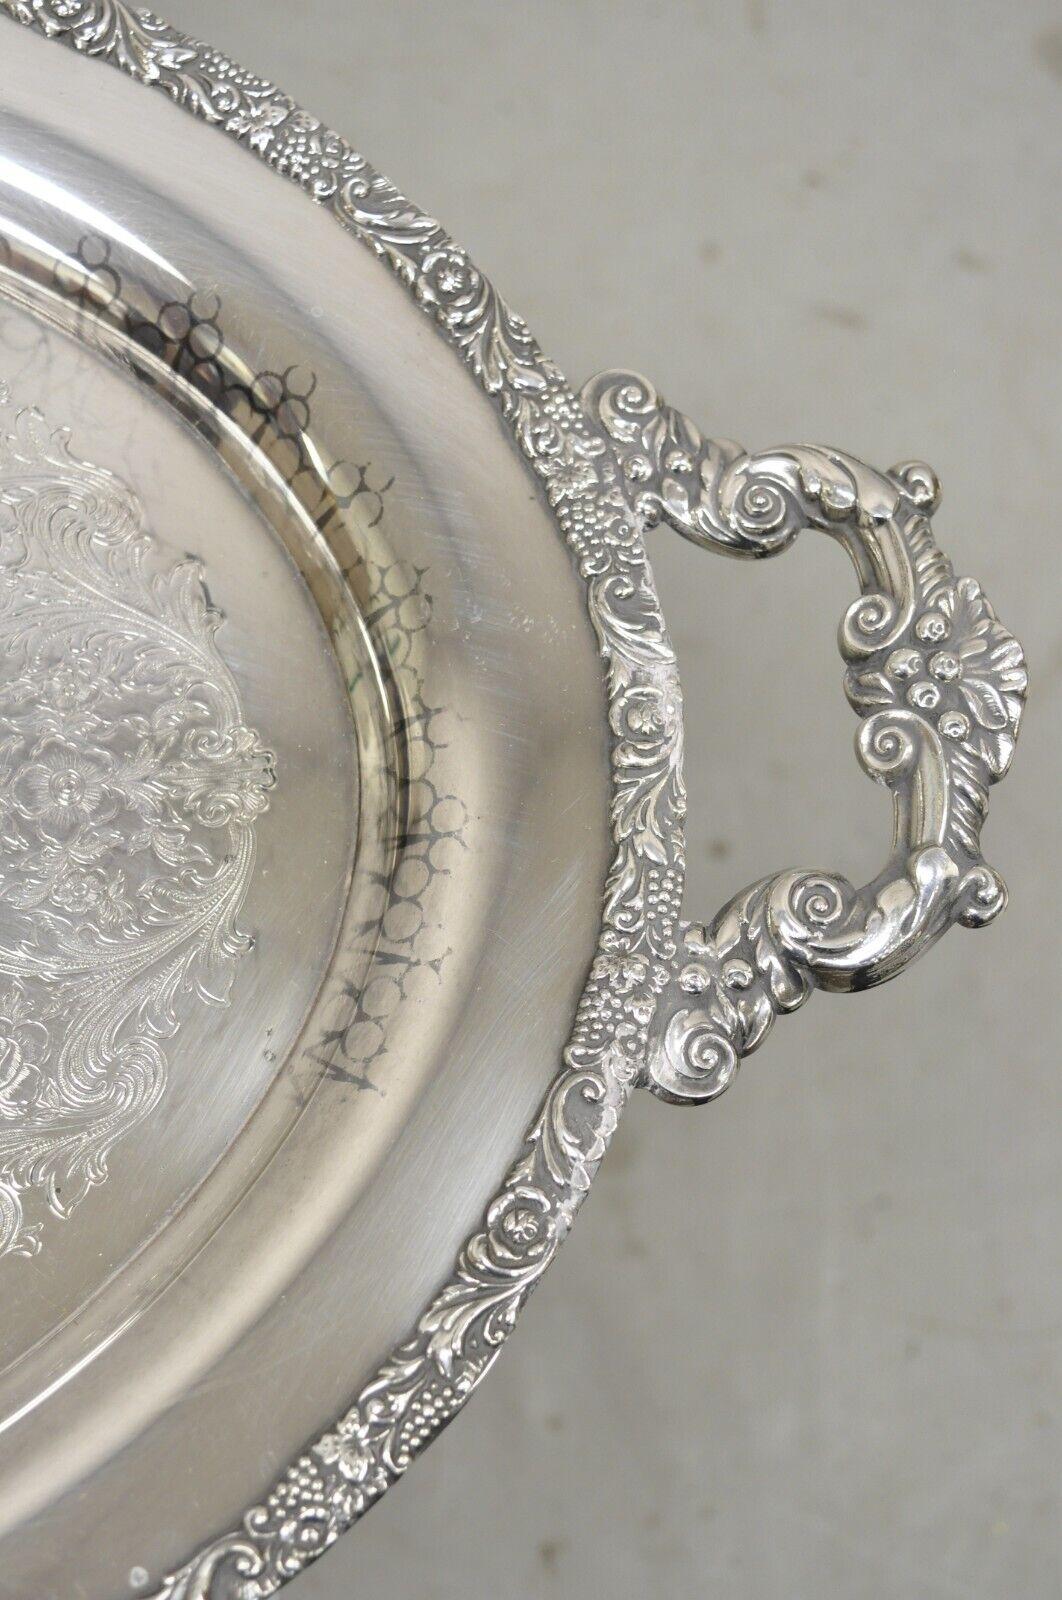 20th Century Vintage Webster Wilcox International Silver Plated Oval Twin Handle Platter Tray